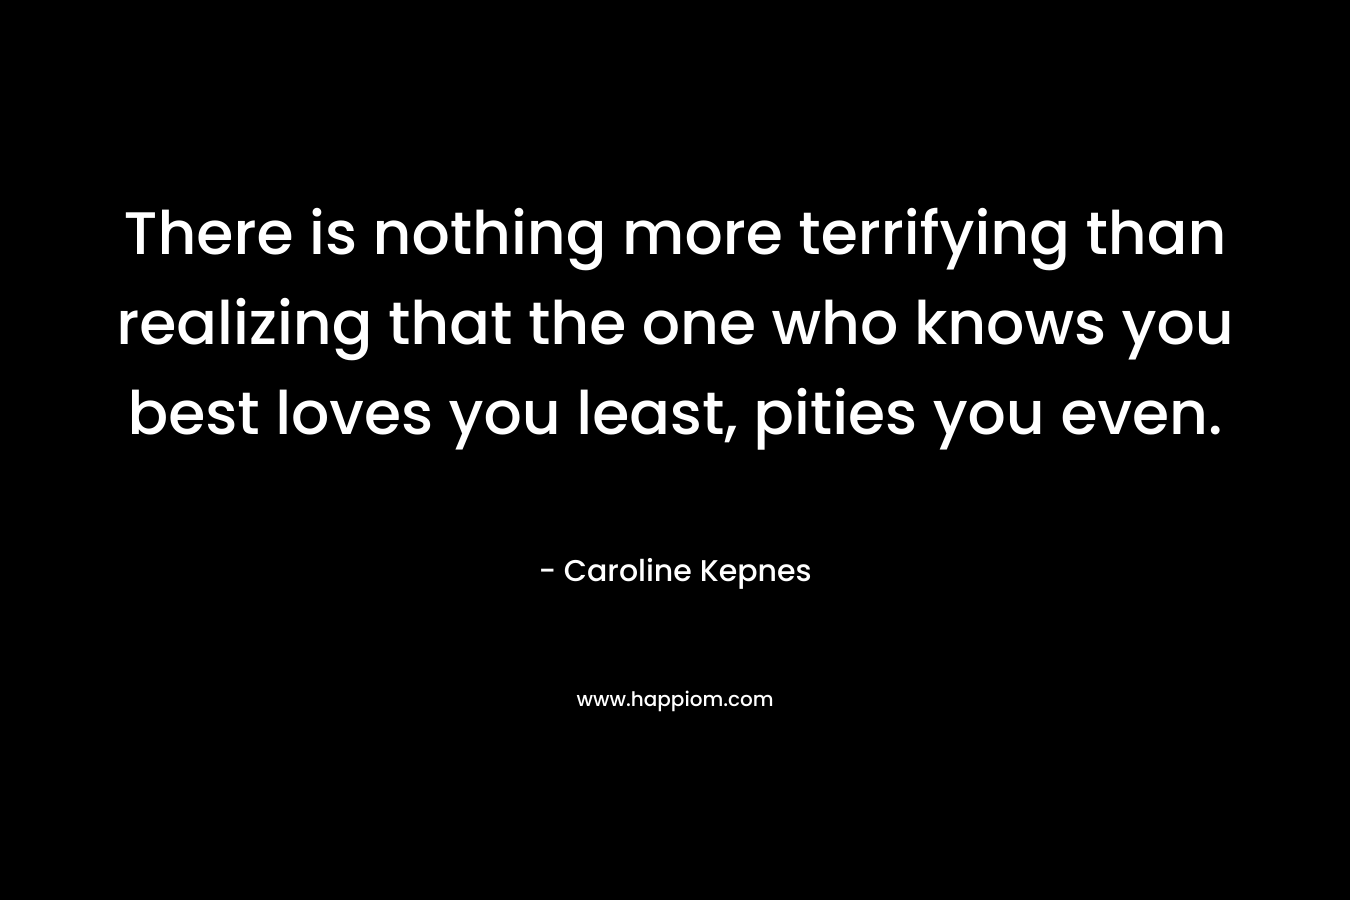 There is nothing more terrifying than realizing that the one who knows you best loves you least, pities you even. – Caroline Kepnes